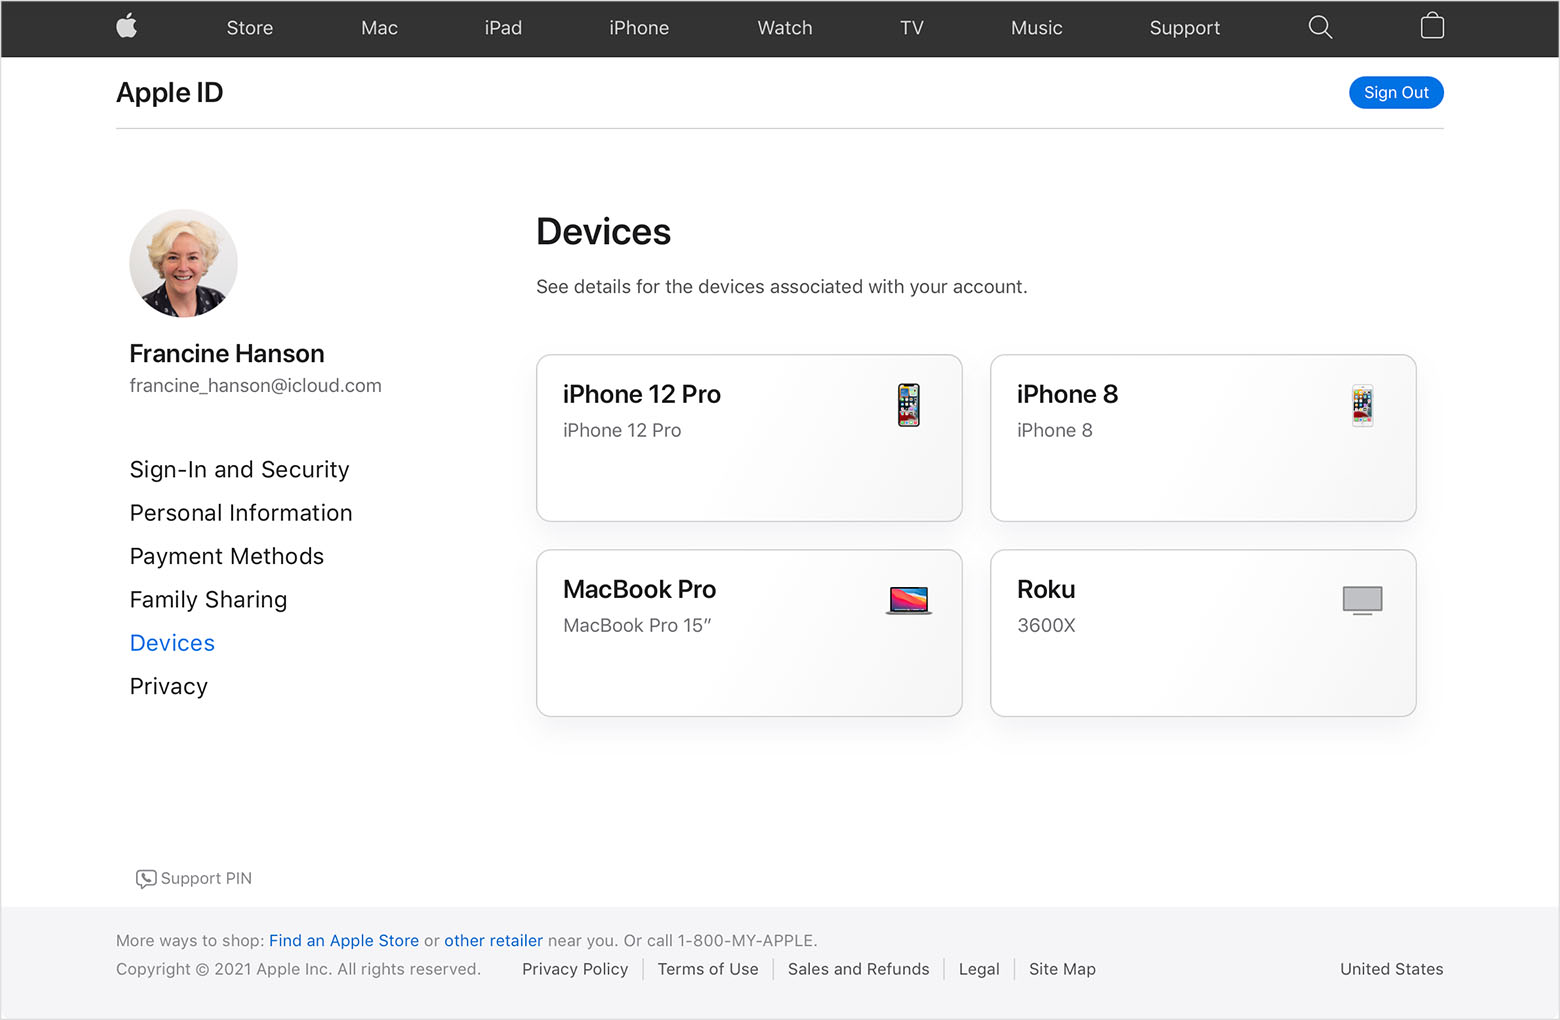 An image of appleid.apple.com showing three devices for Francine Hanson: an iPhone 12 Pro, a MacBook Pro and a Roku.